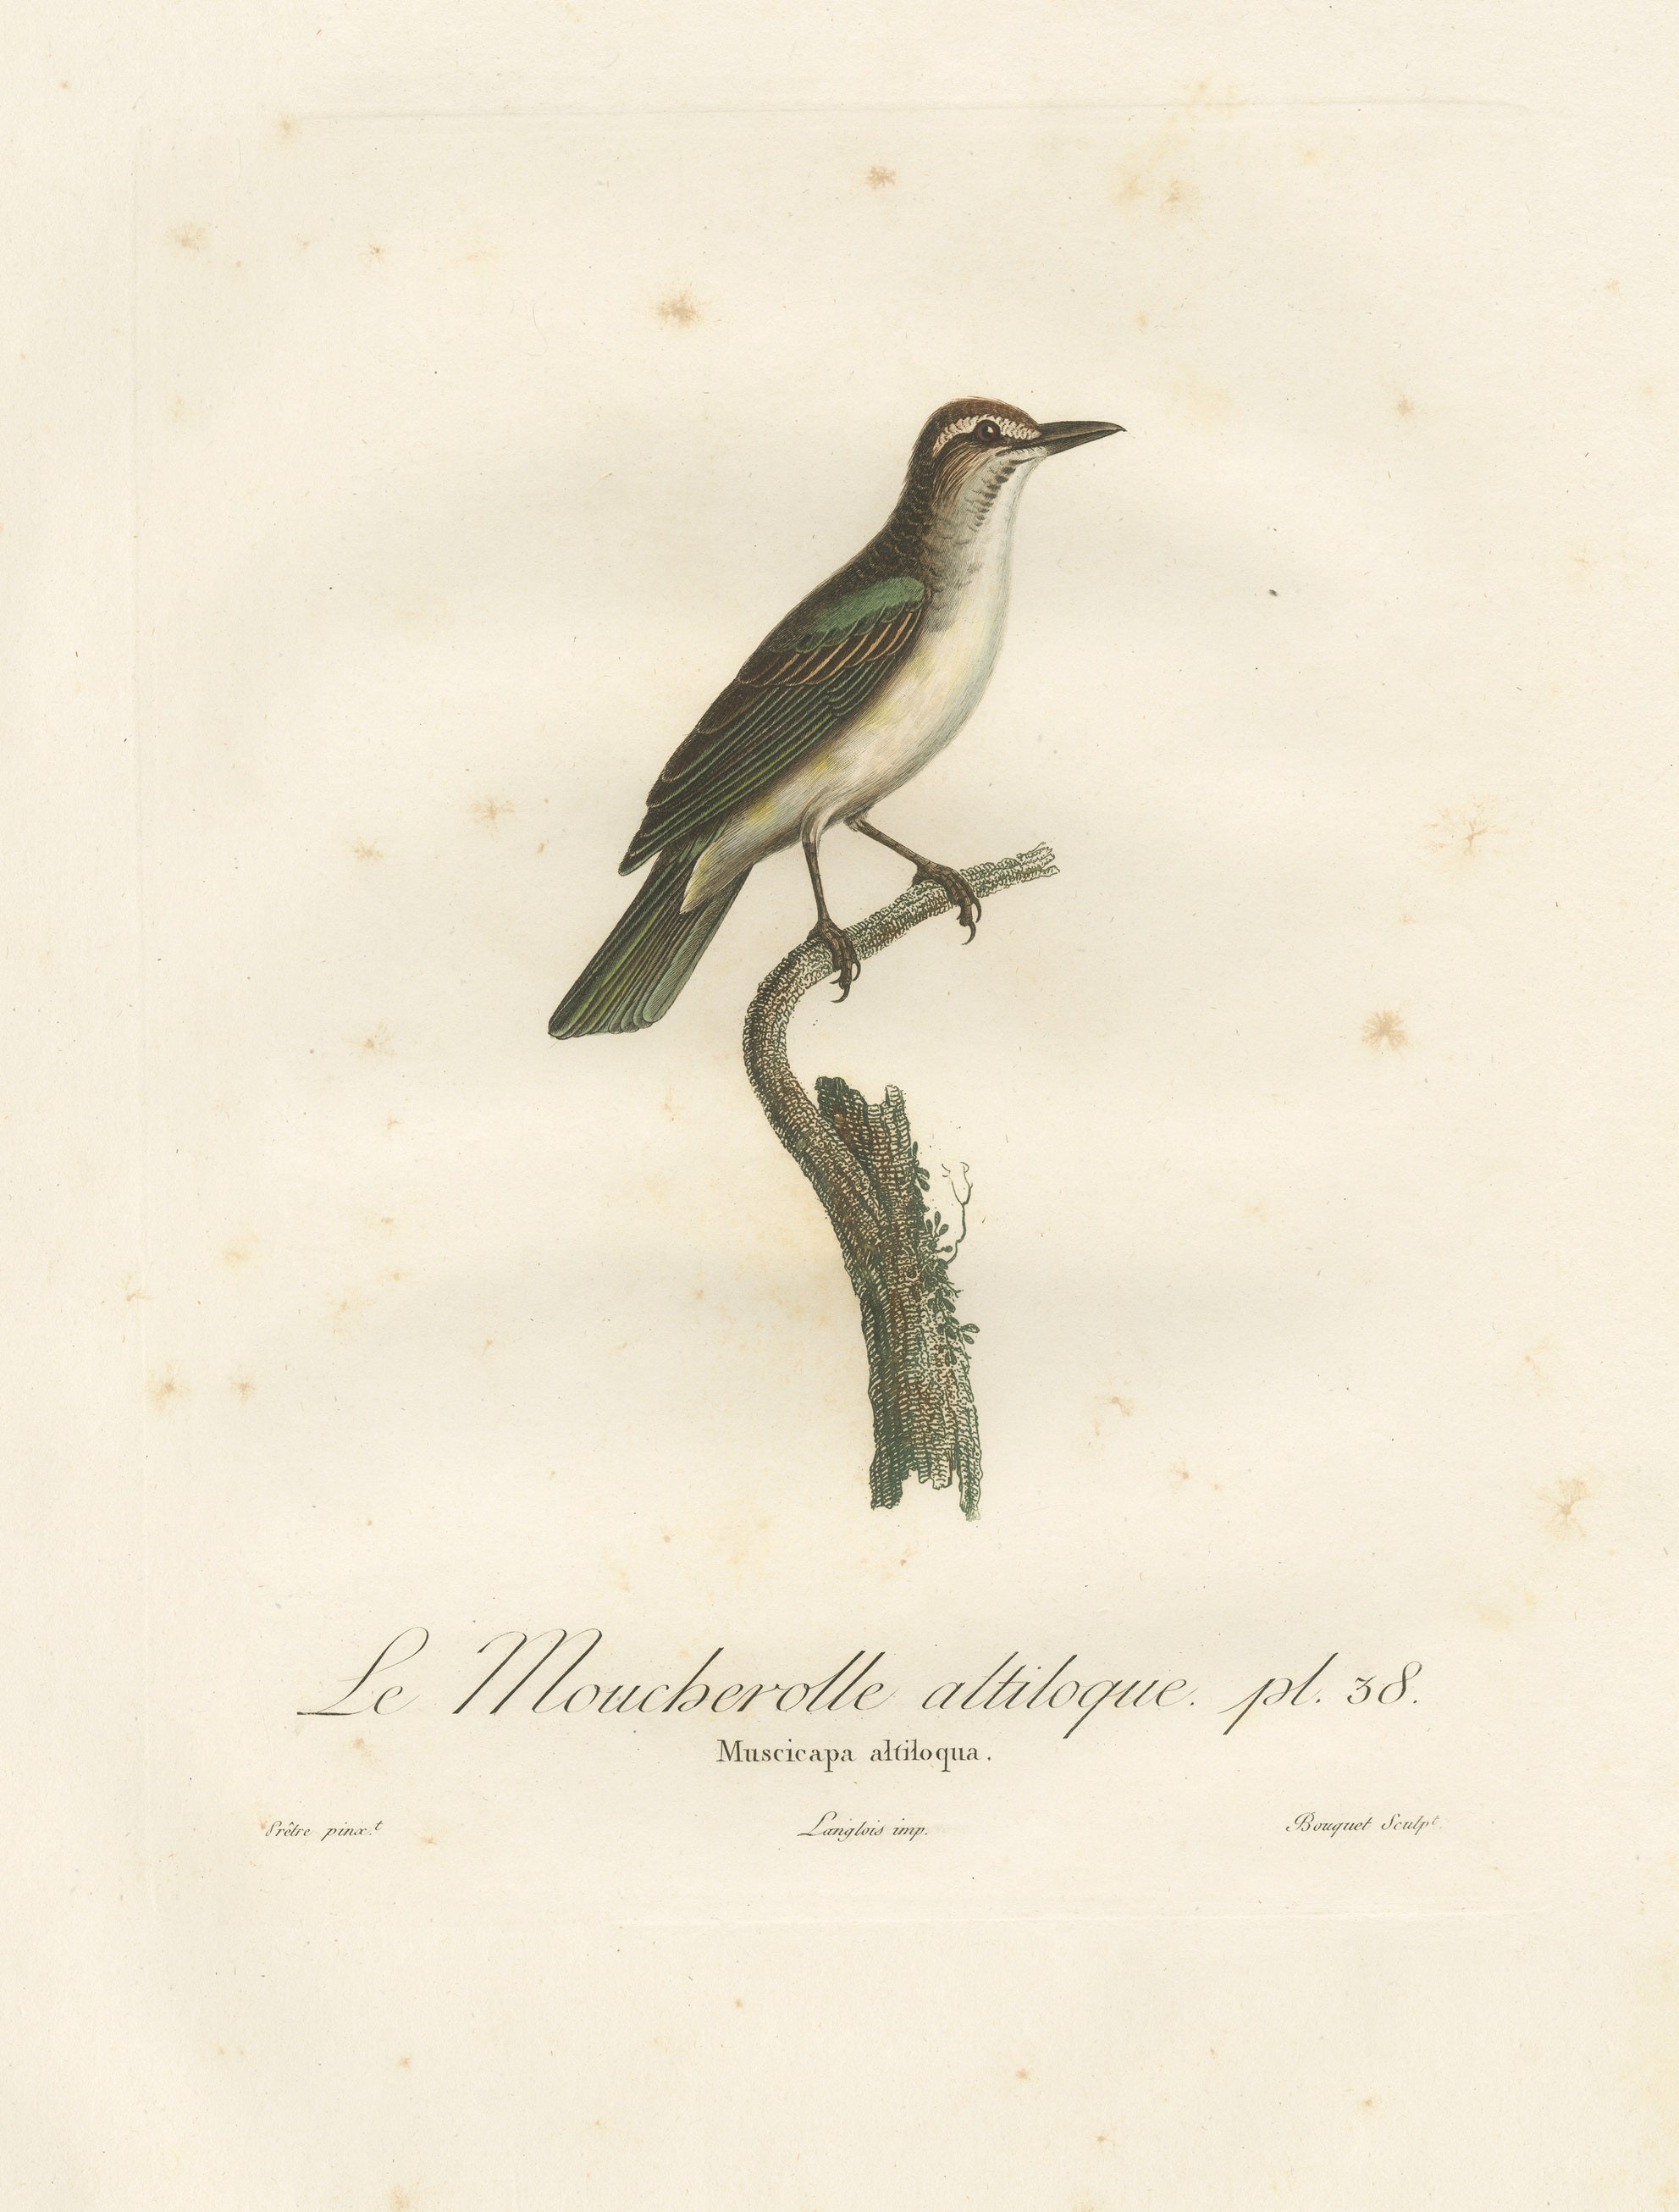 This sumptuous and rare antique bird print, titled 